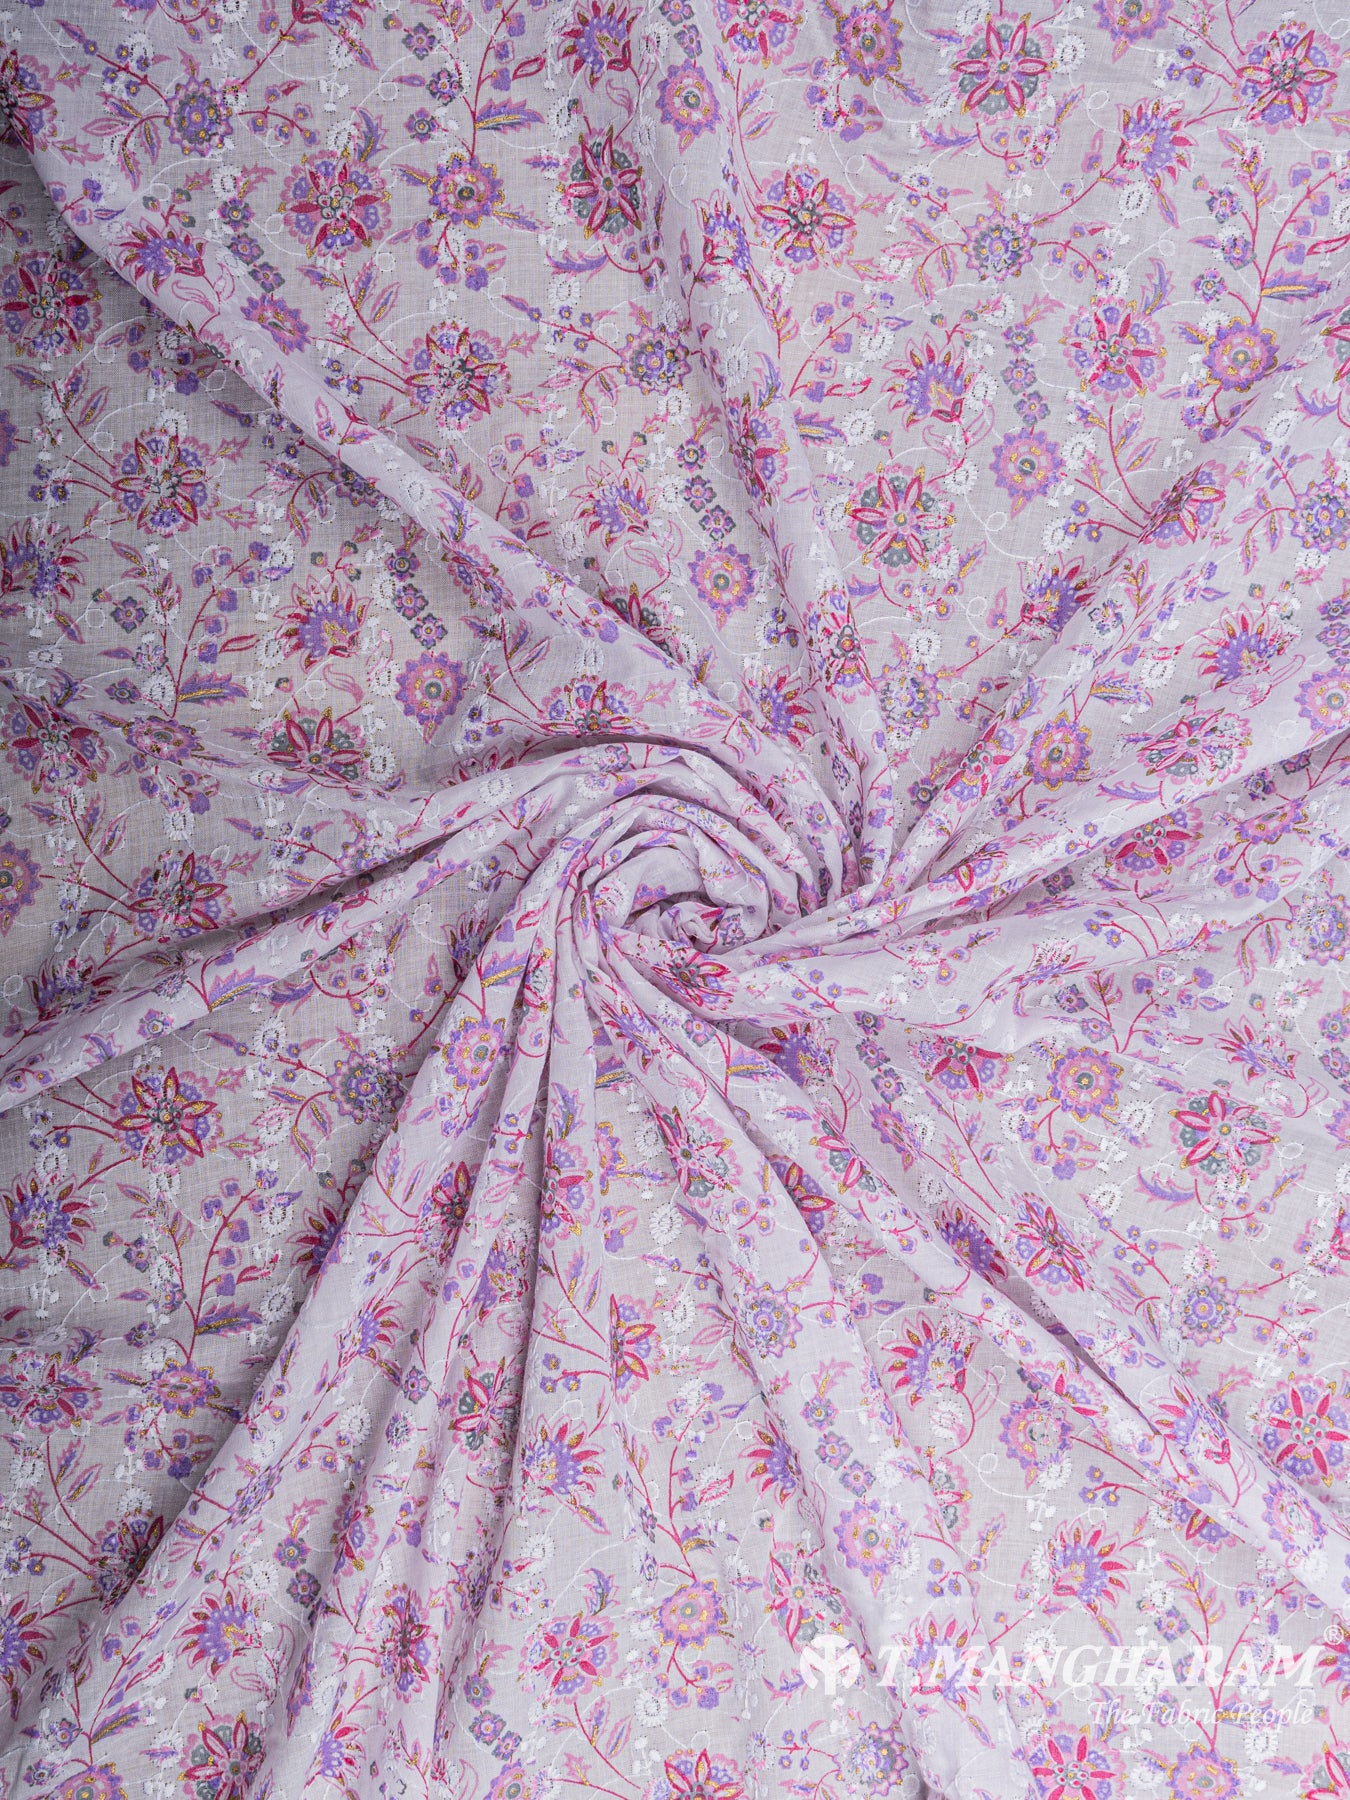 Violet Cotton Embroidery Fabric - EA1708 view-1